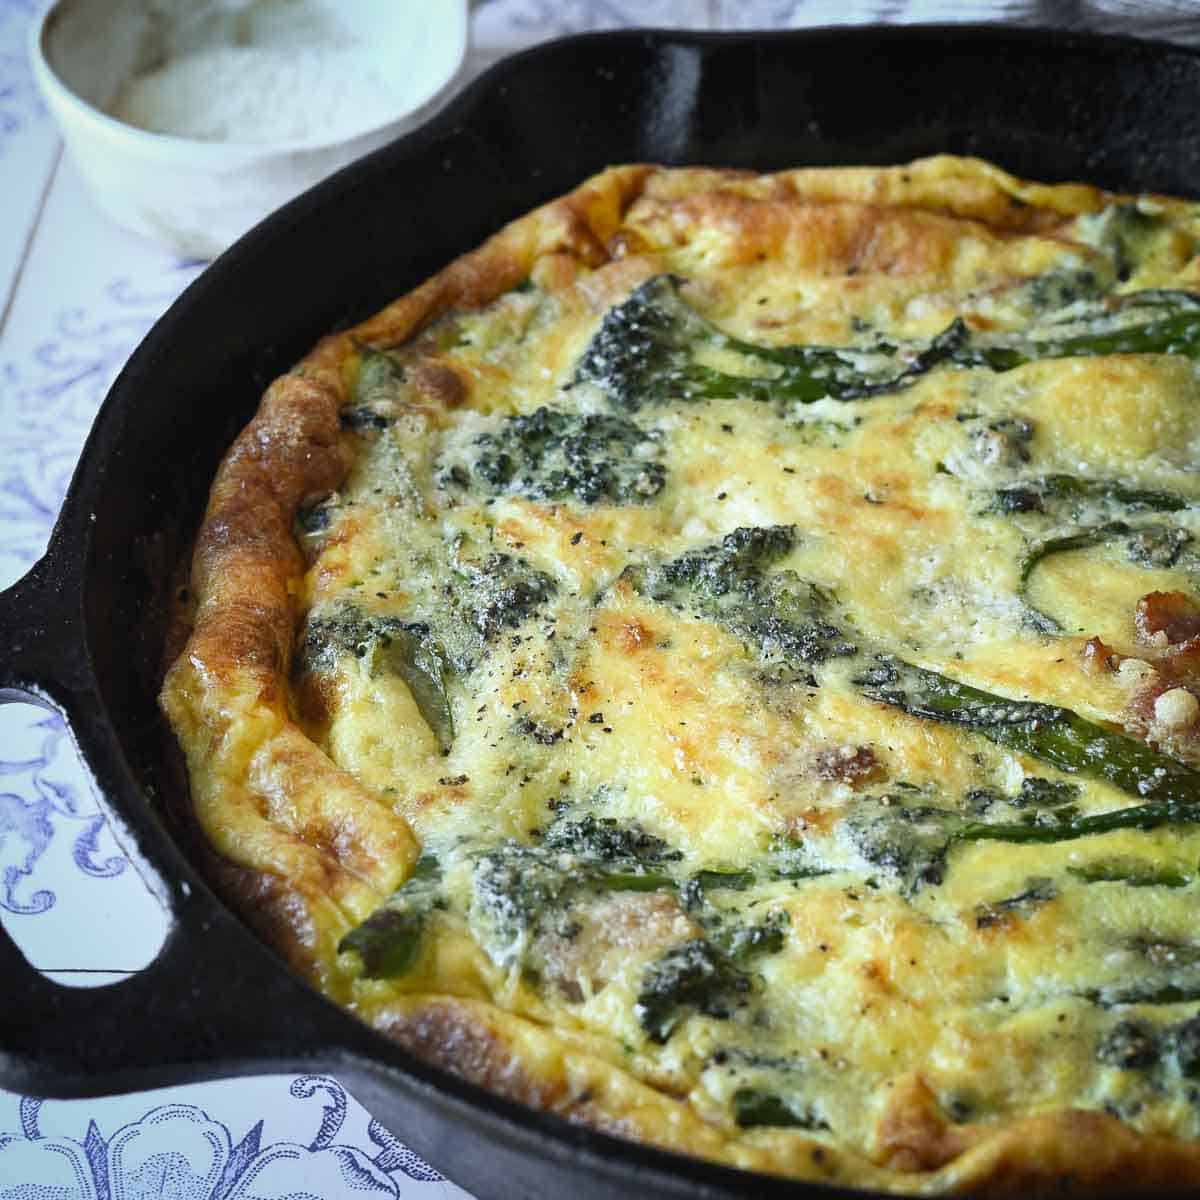 Broccolini frittata in a cast iron skillet on a tile surface.